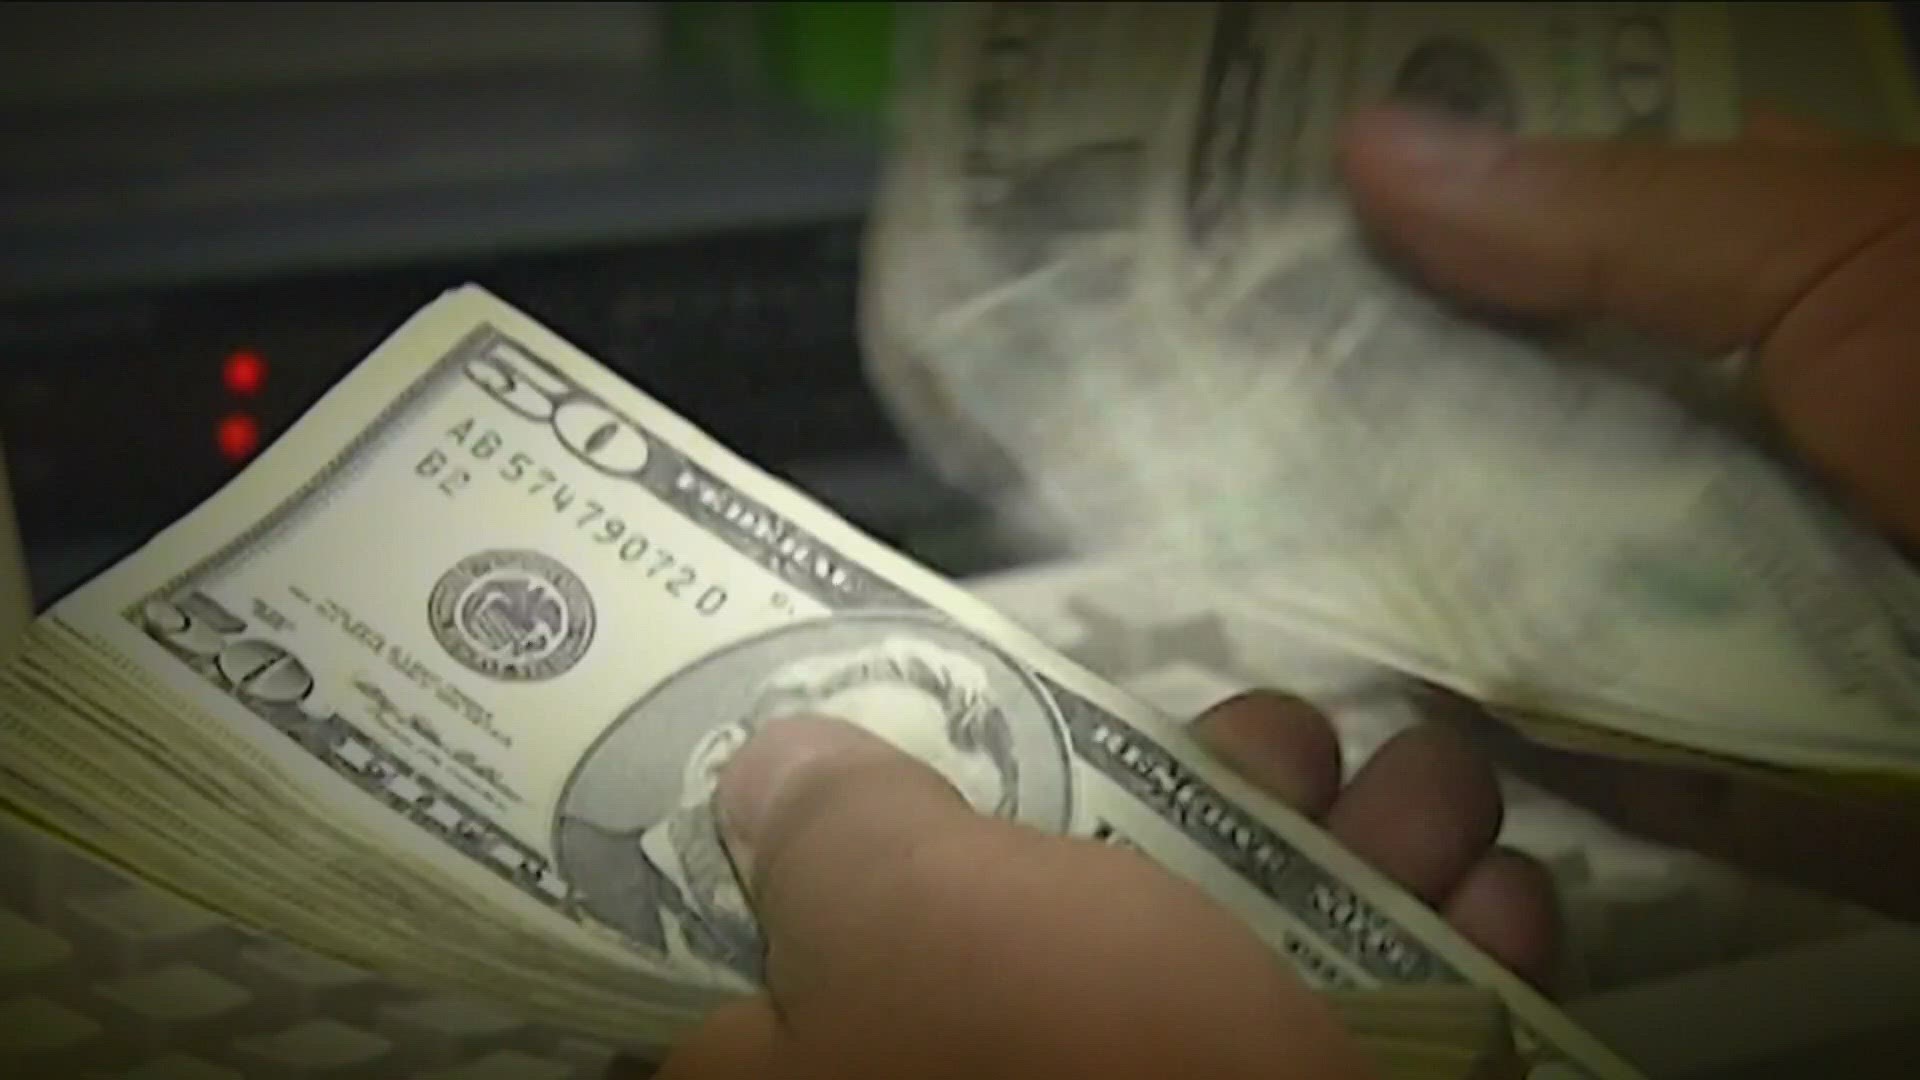 The Department of Revenue will begin issuing checks of between $250-$500 next month